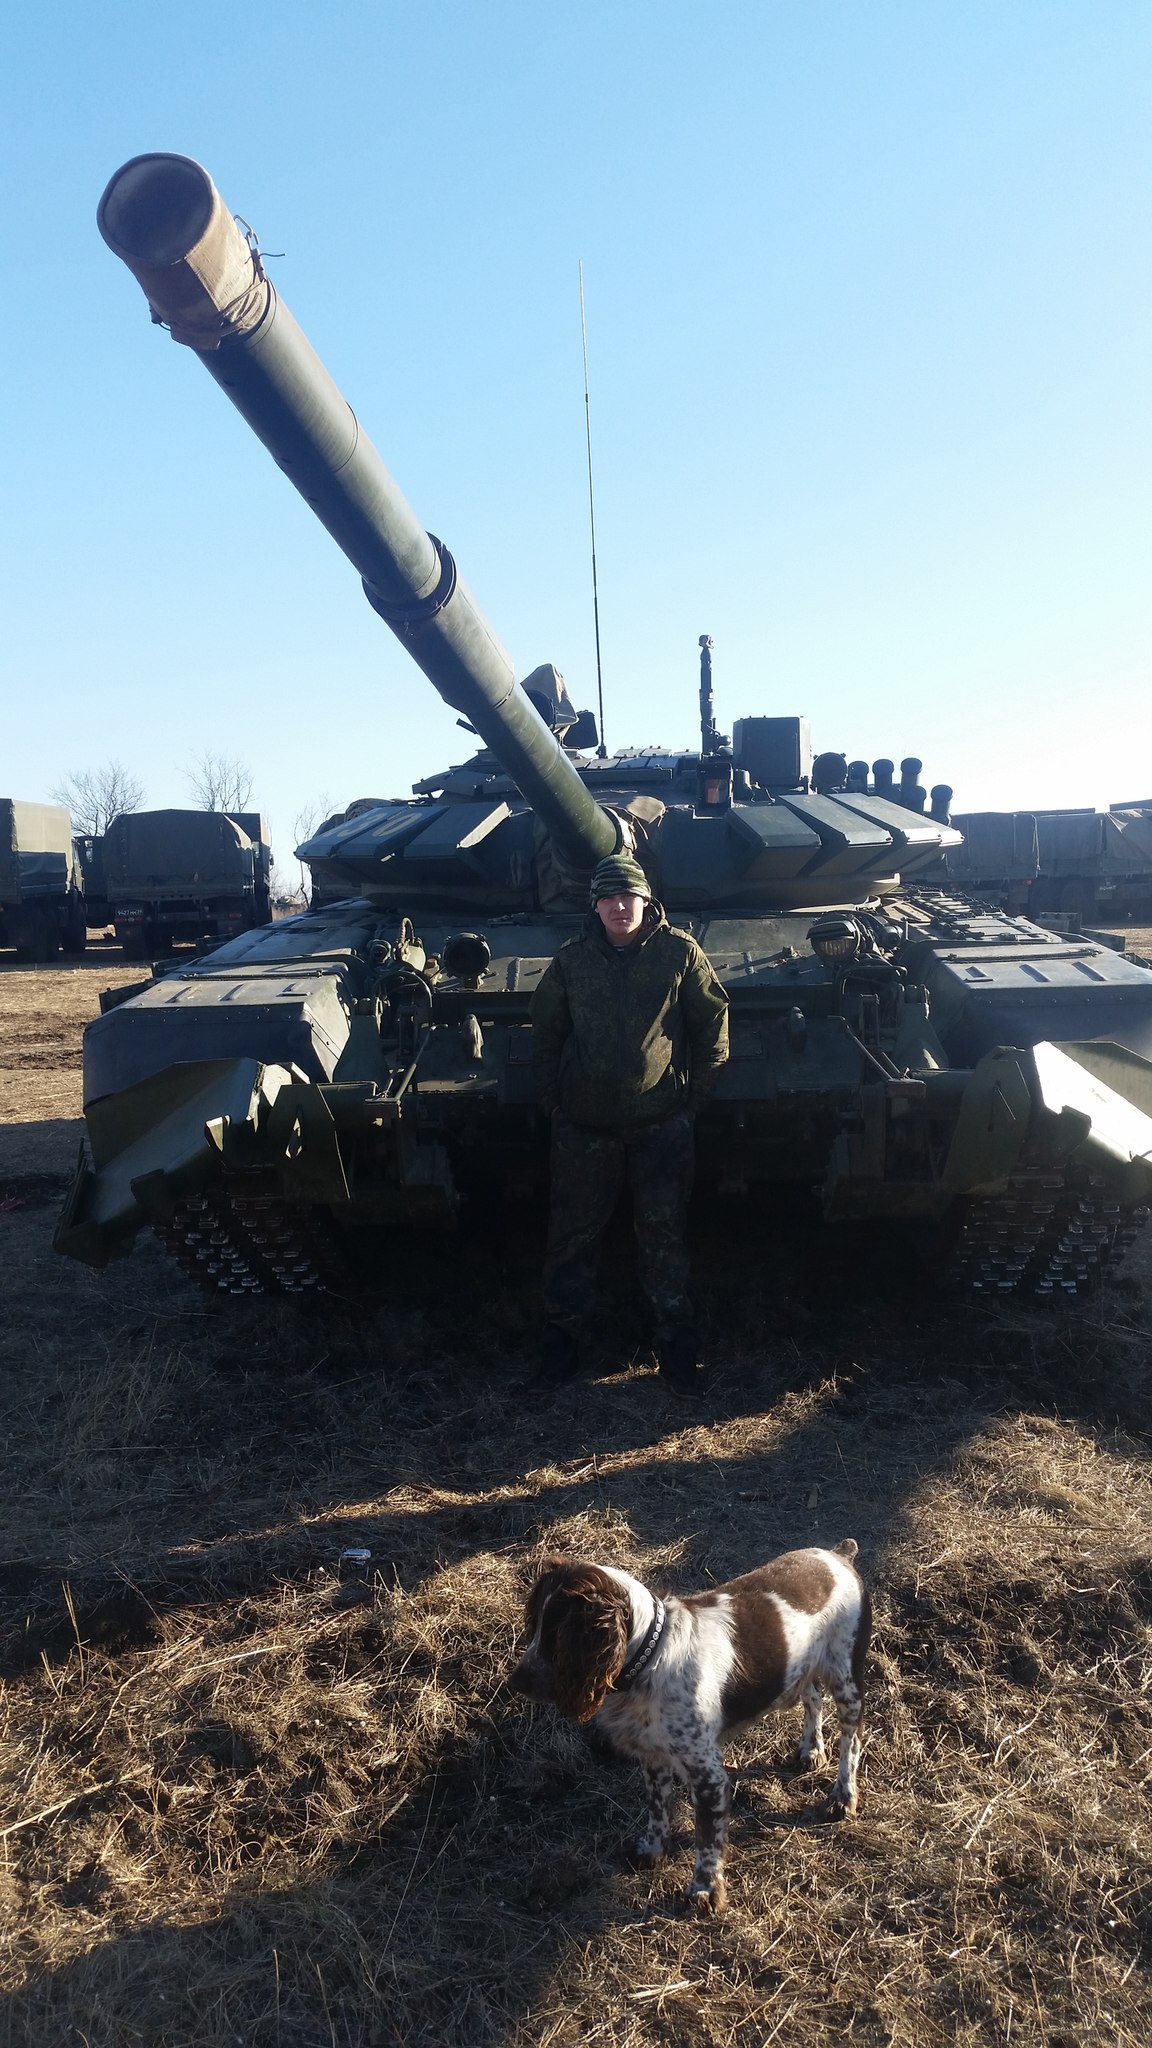 T-72B3 tank numbered 830 with the inscription "ARMORED SHIELD OF THE LNR" on the right side. Archive / Original